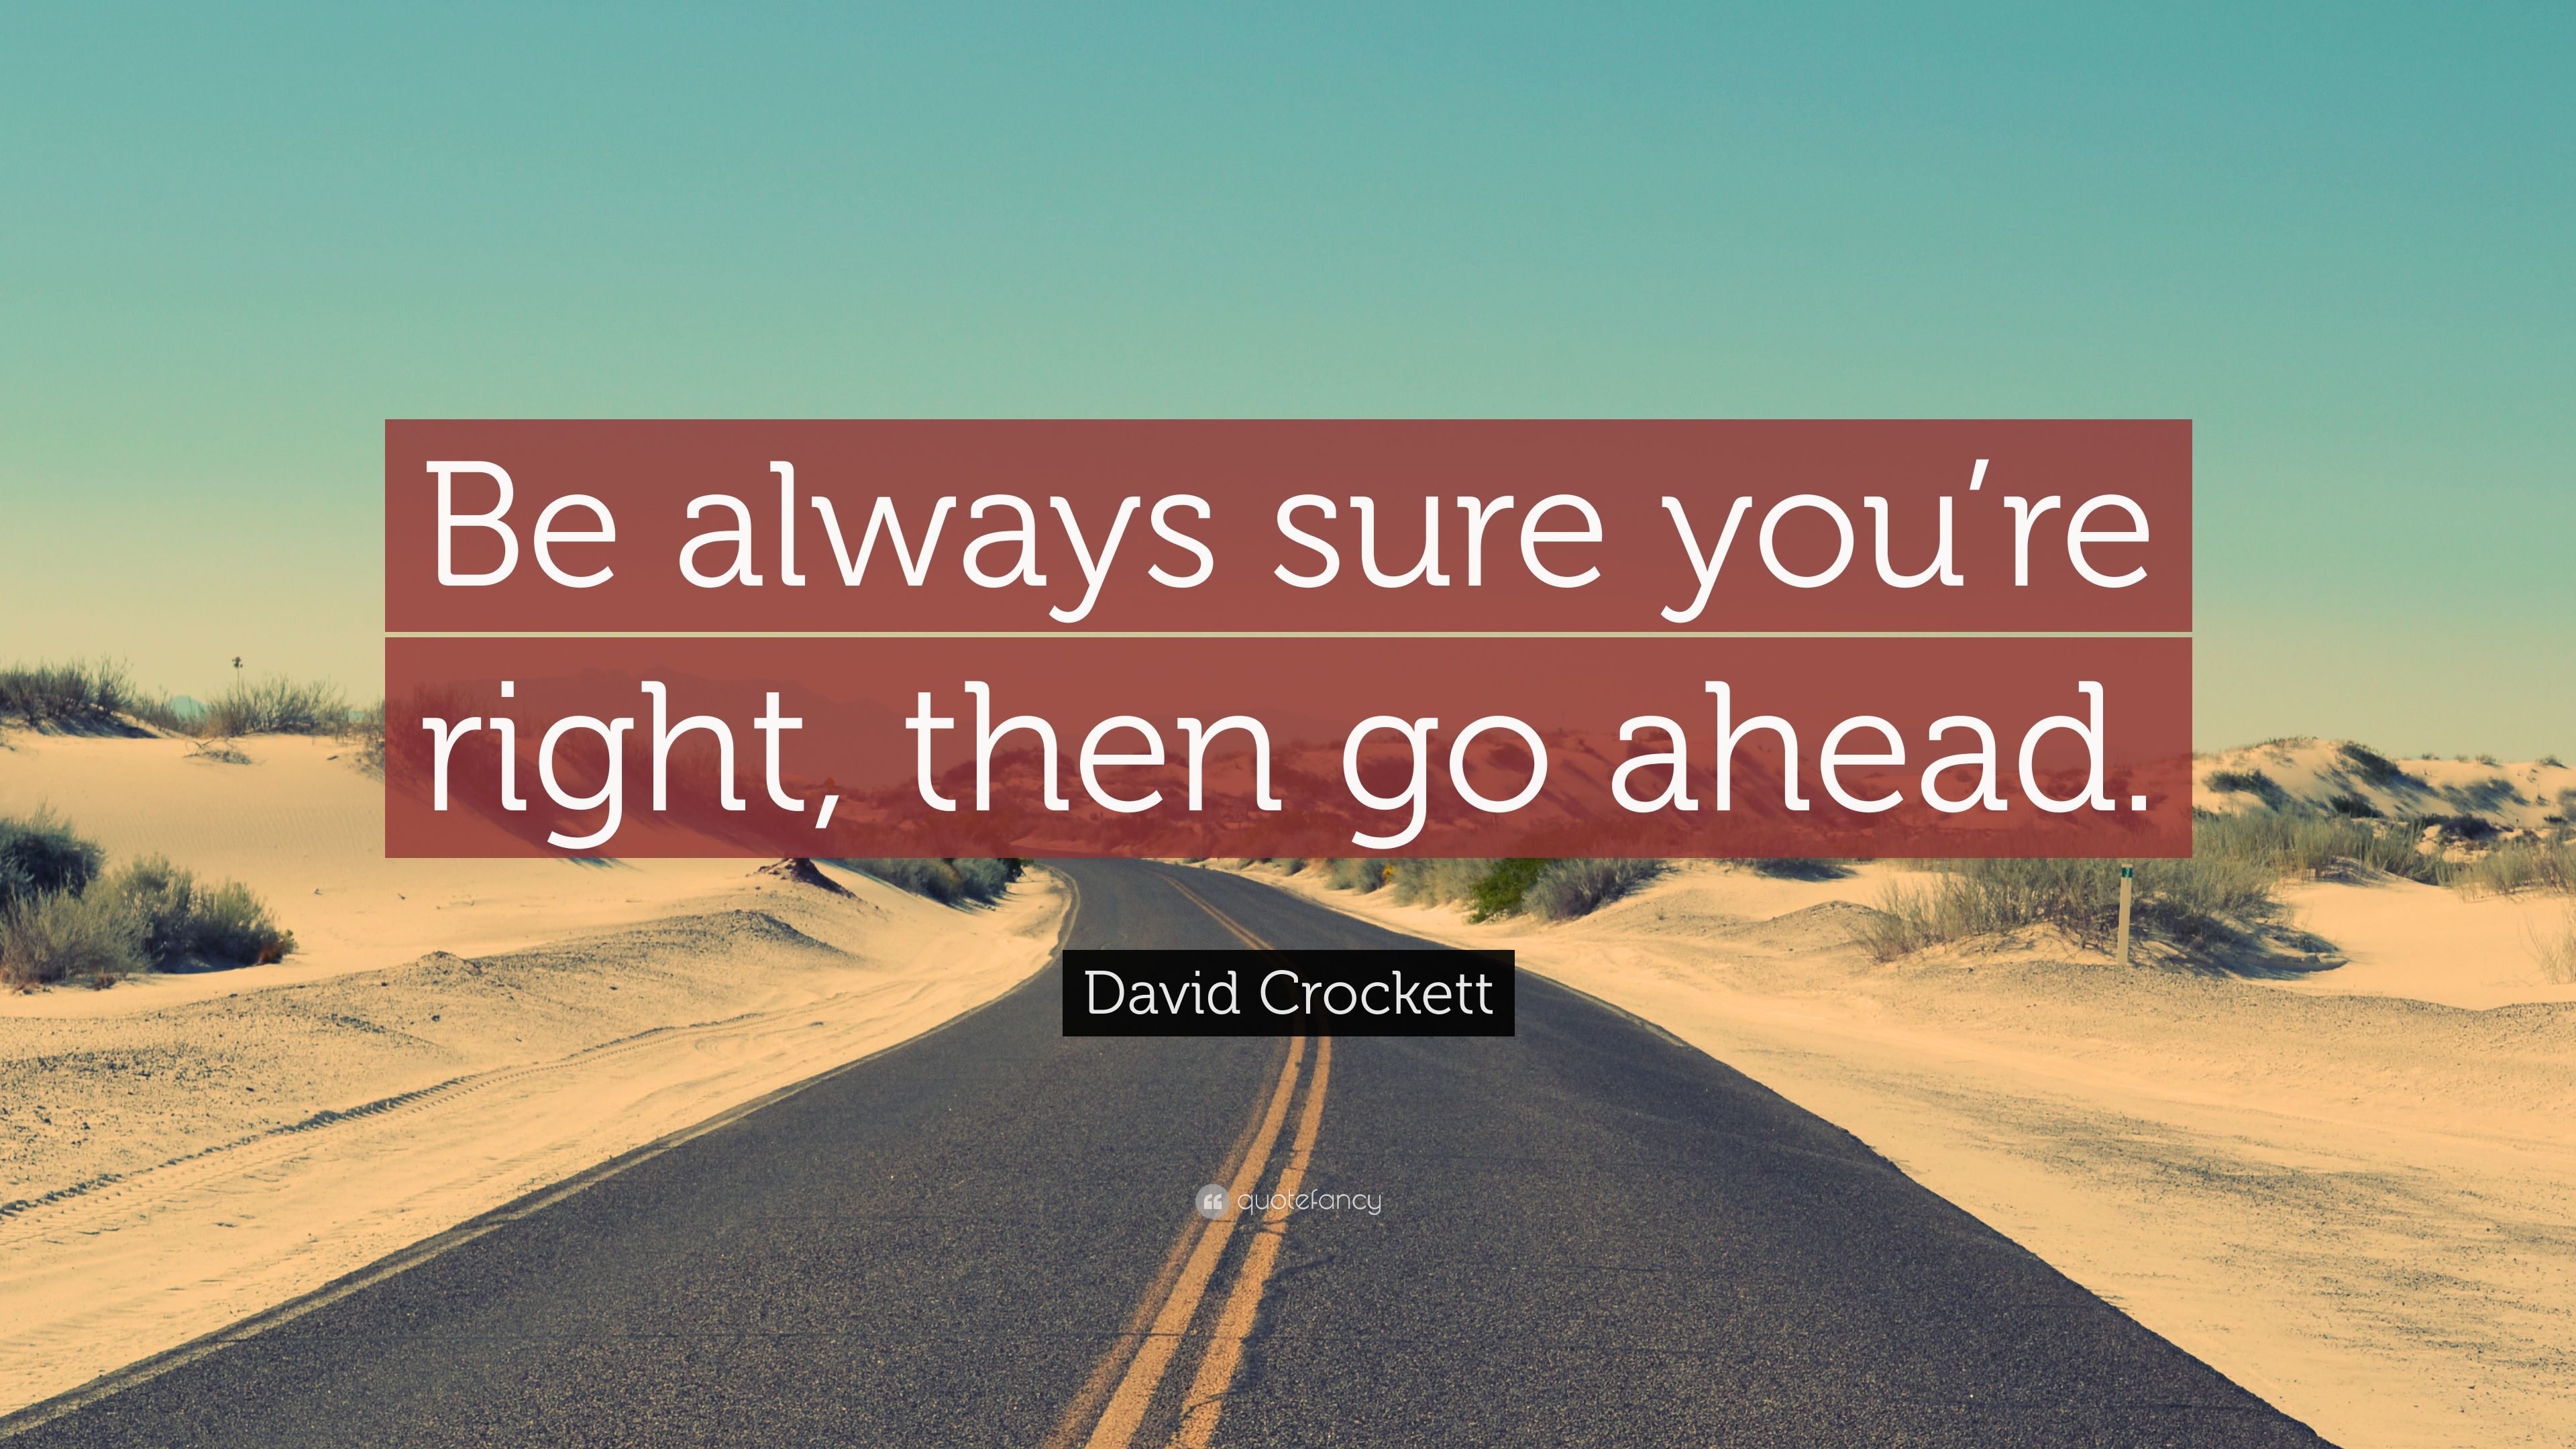 David Crockett Quote: “Be always sure you're right, then go ahead.” (18 wallpaper)